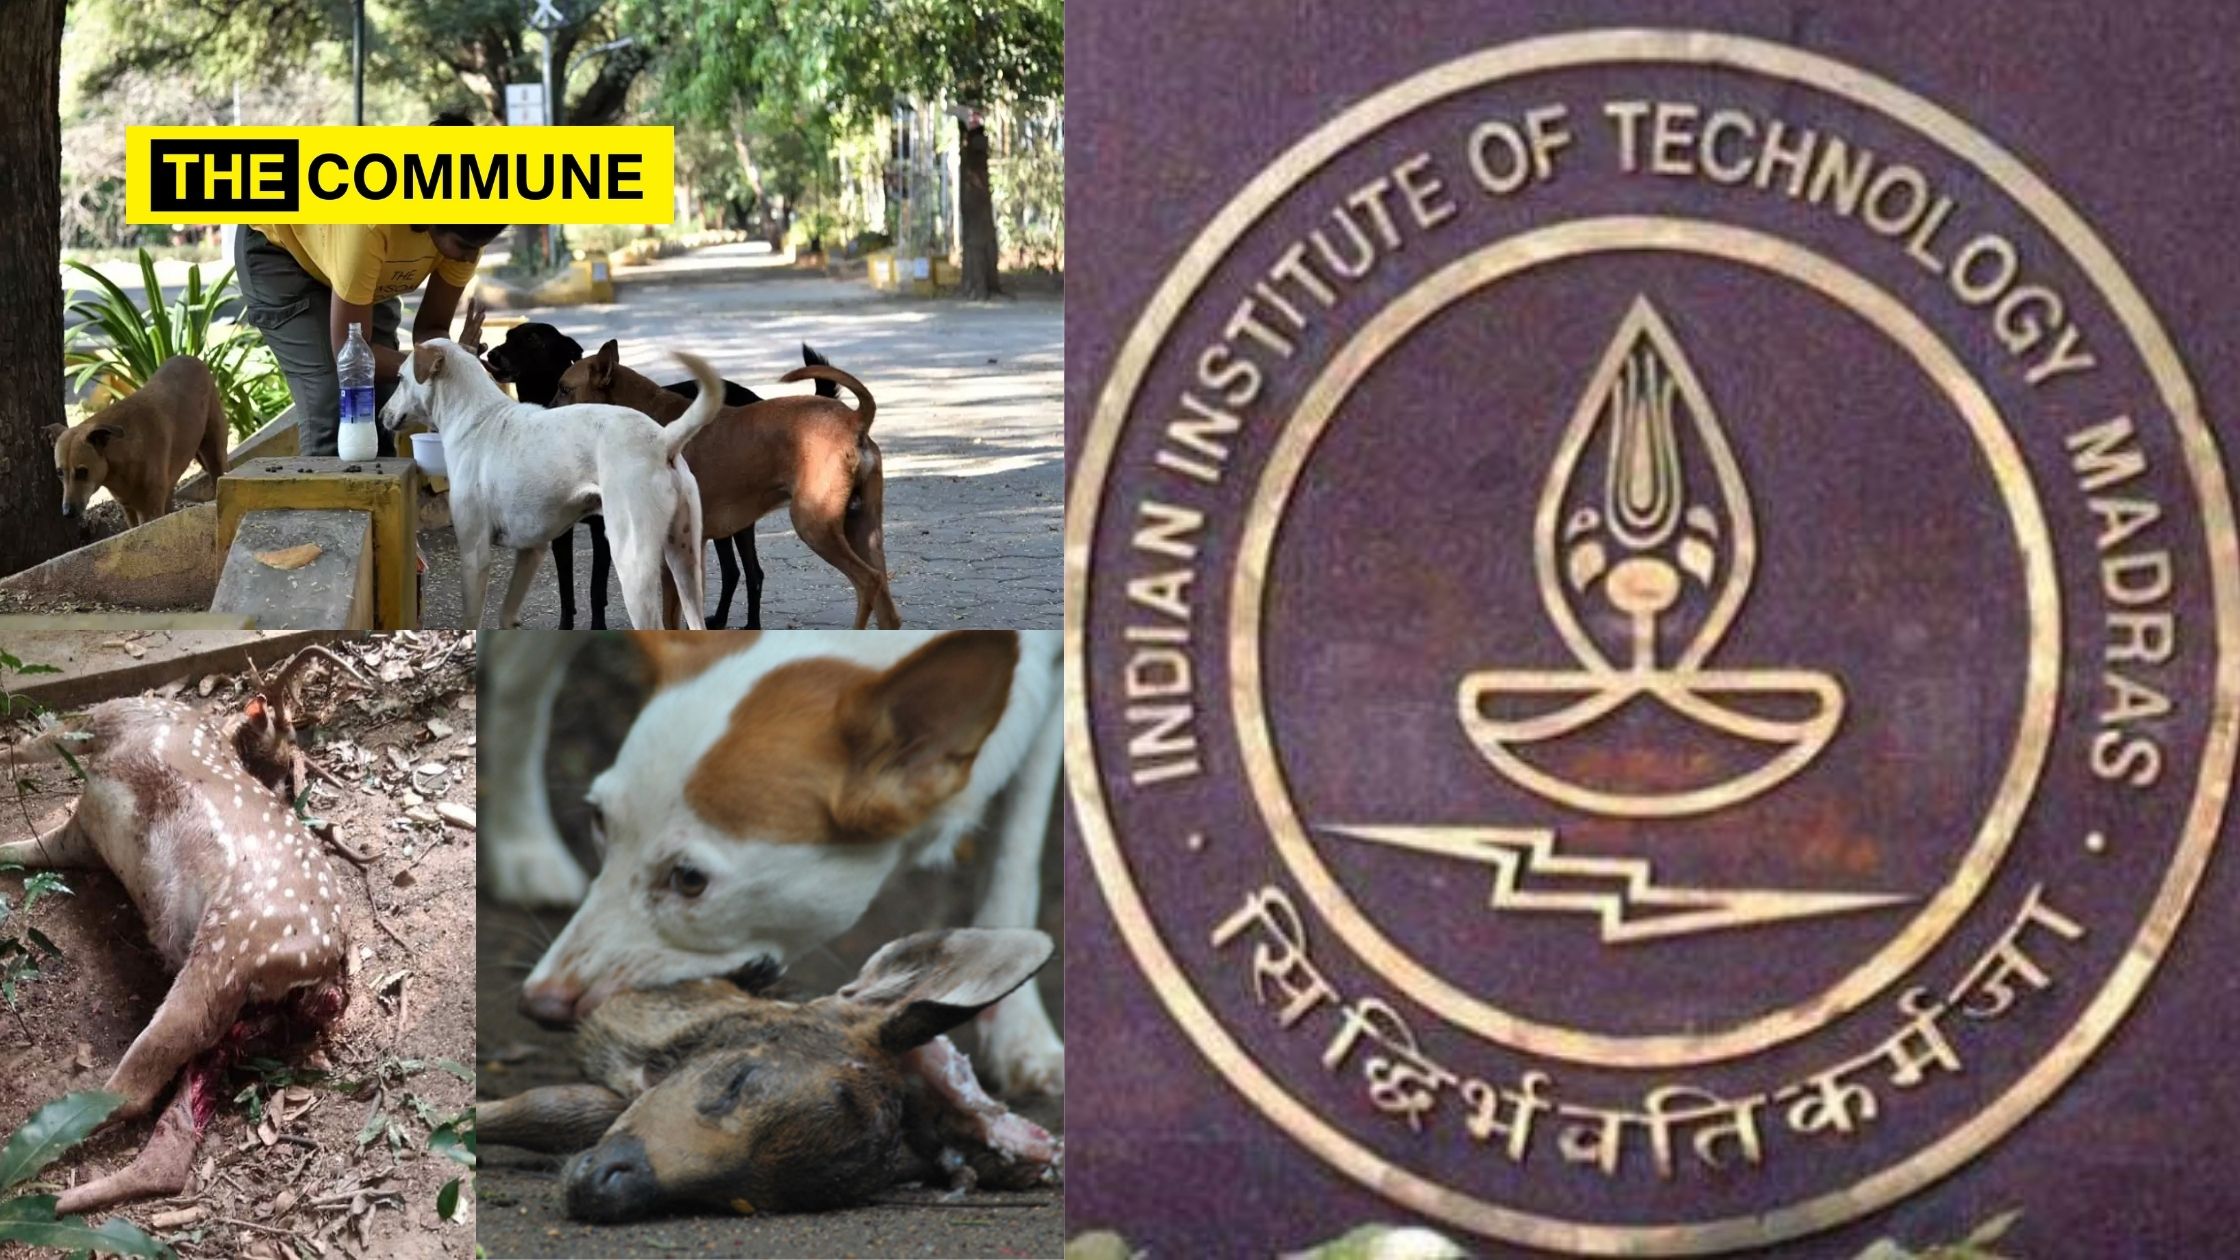 The stray dogs menace at IIT-Madras: Deers in campus dying due to stray dogs  fed by 'dog-lovers' - The Commune